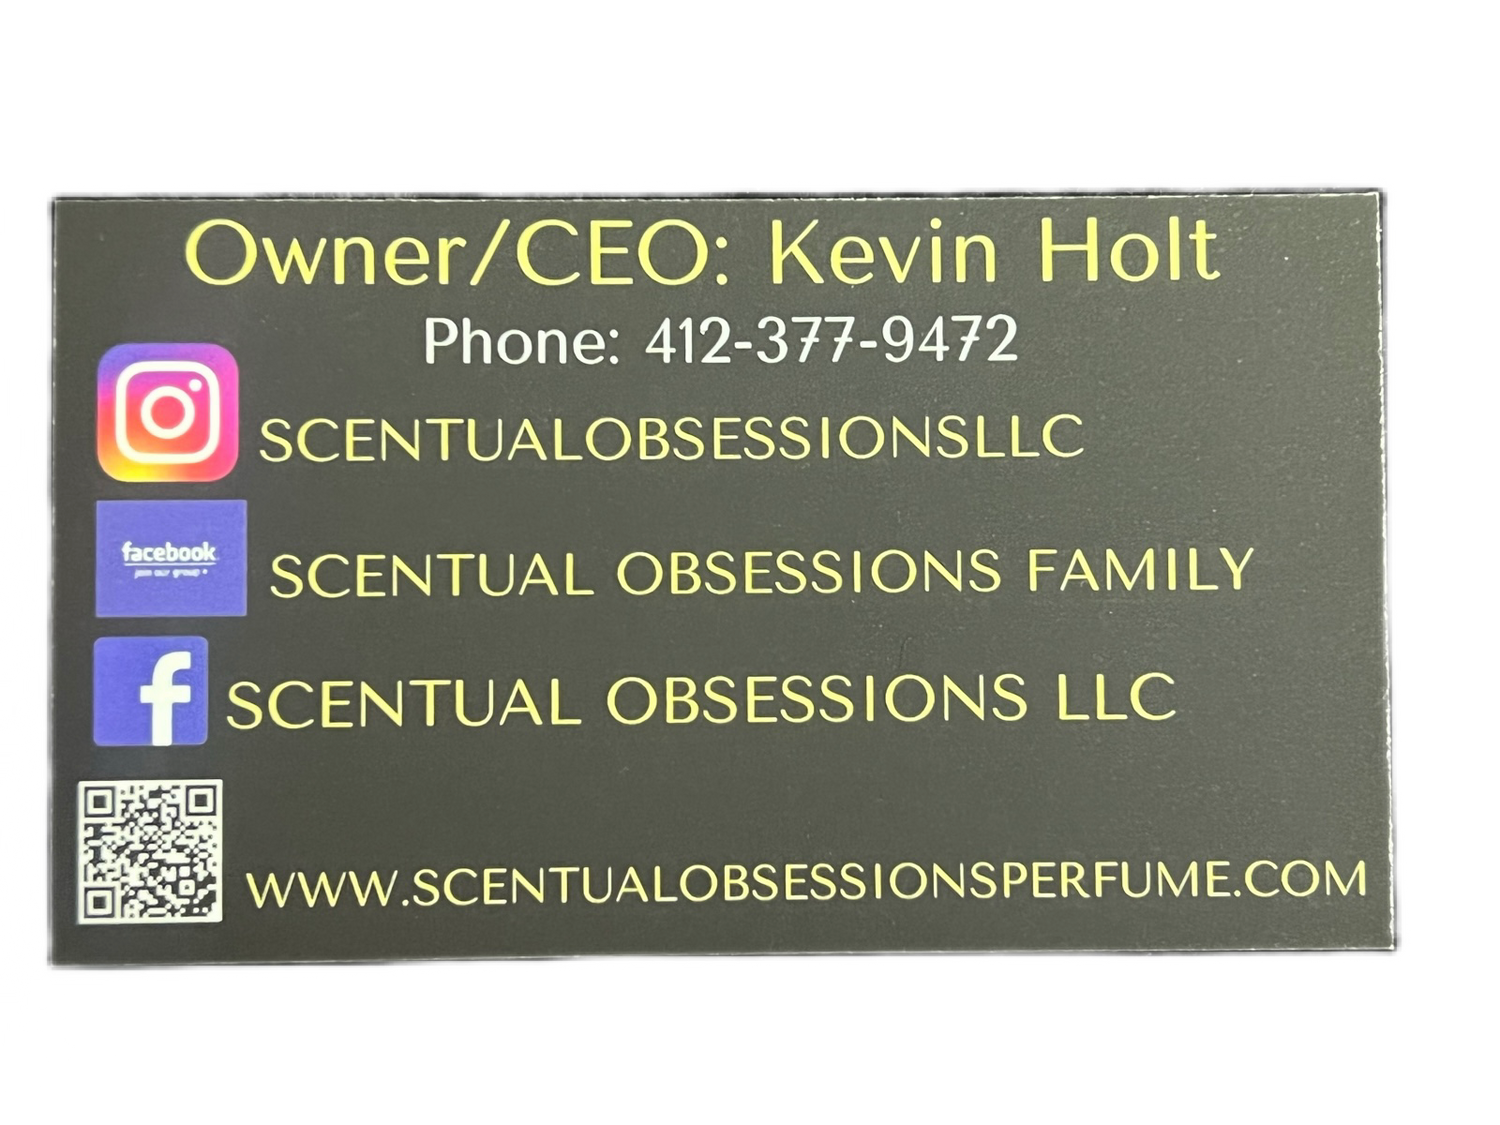 Looking for the best perfume shop with the biggest selection & best prices? Scentual Obsessions in Fort Myers Florida has over 700 fragrances in stock under $100.